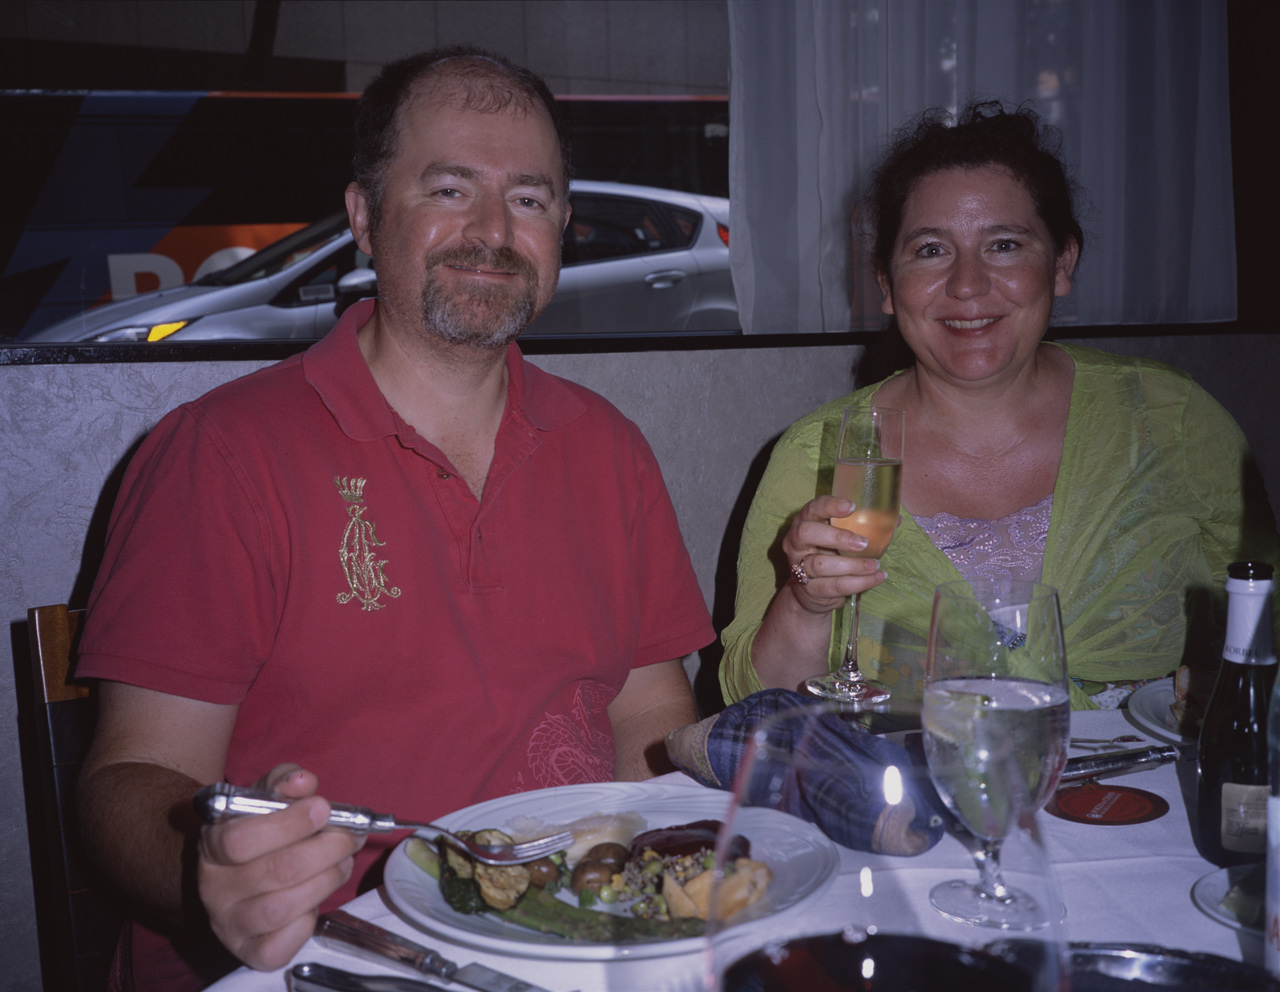 Steve and Jackie celebrating Jackie's Birthday meal at the Brazilian restaurant FOGO DE CHAO